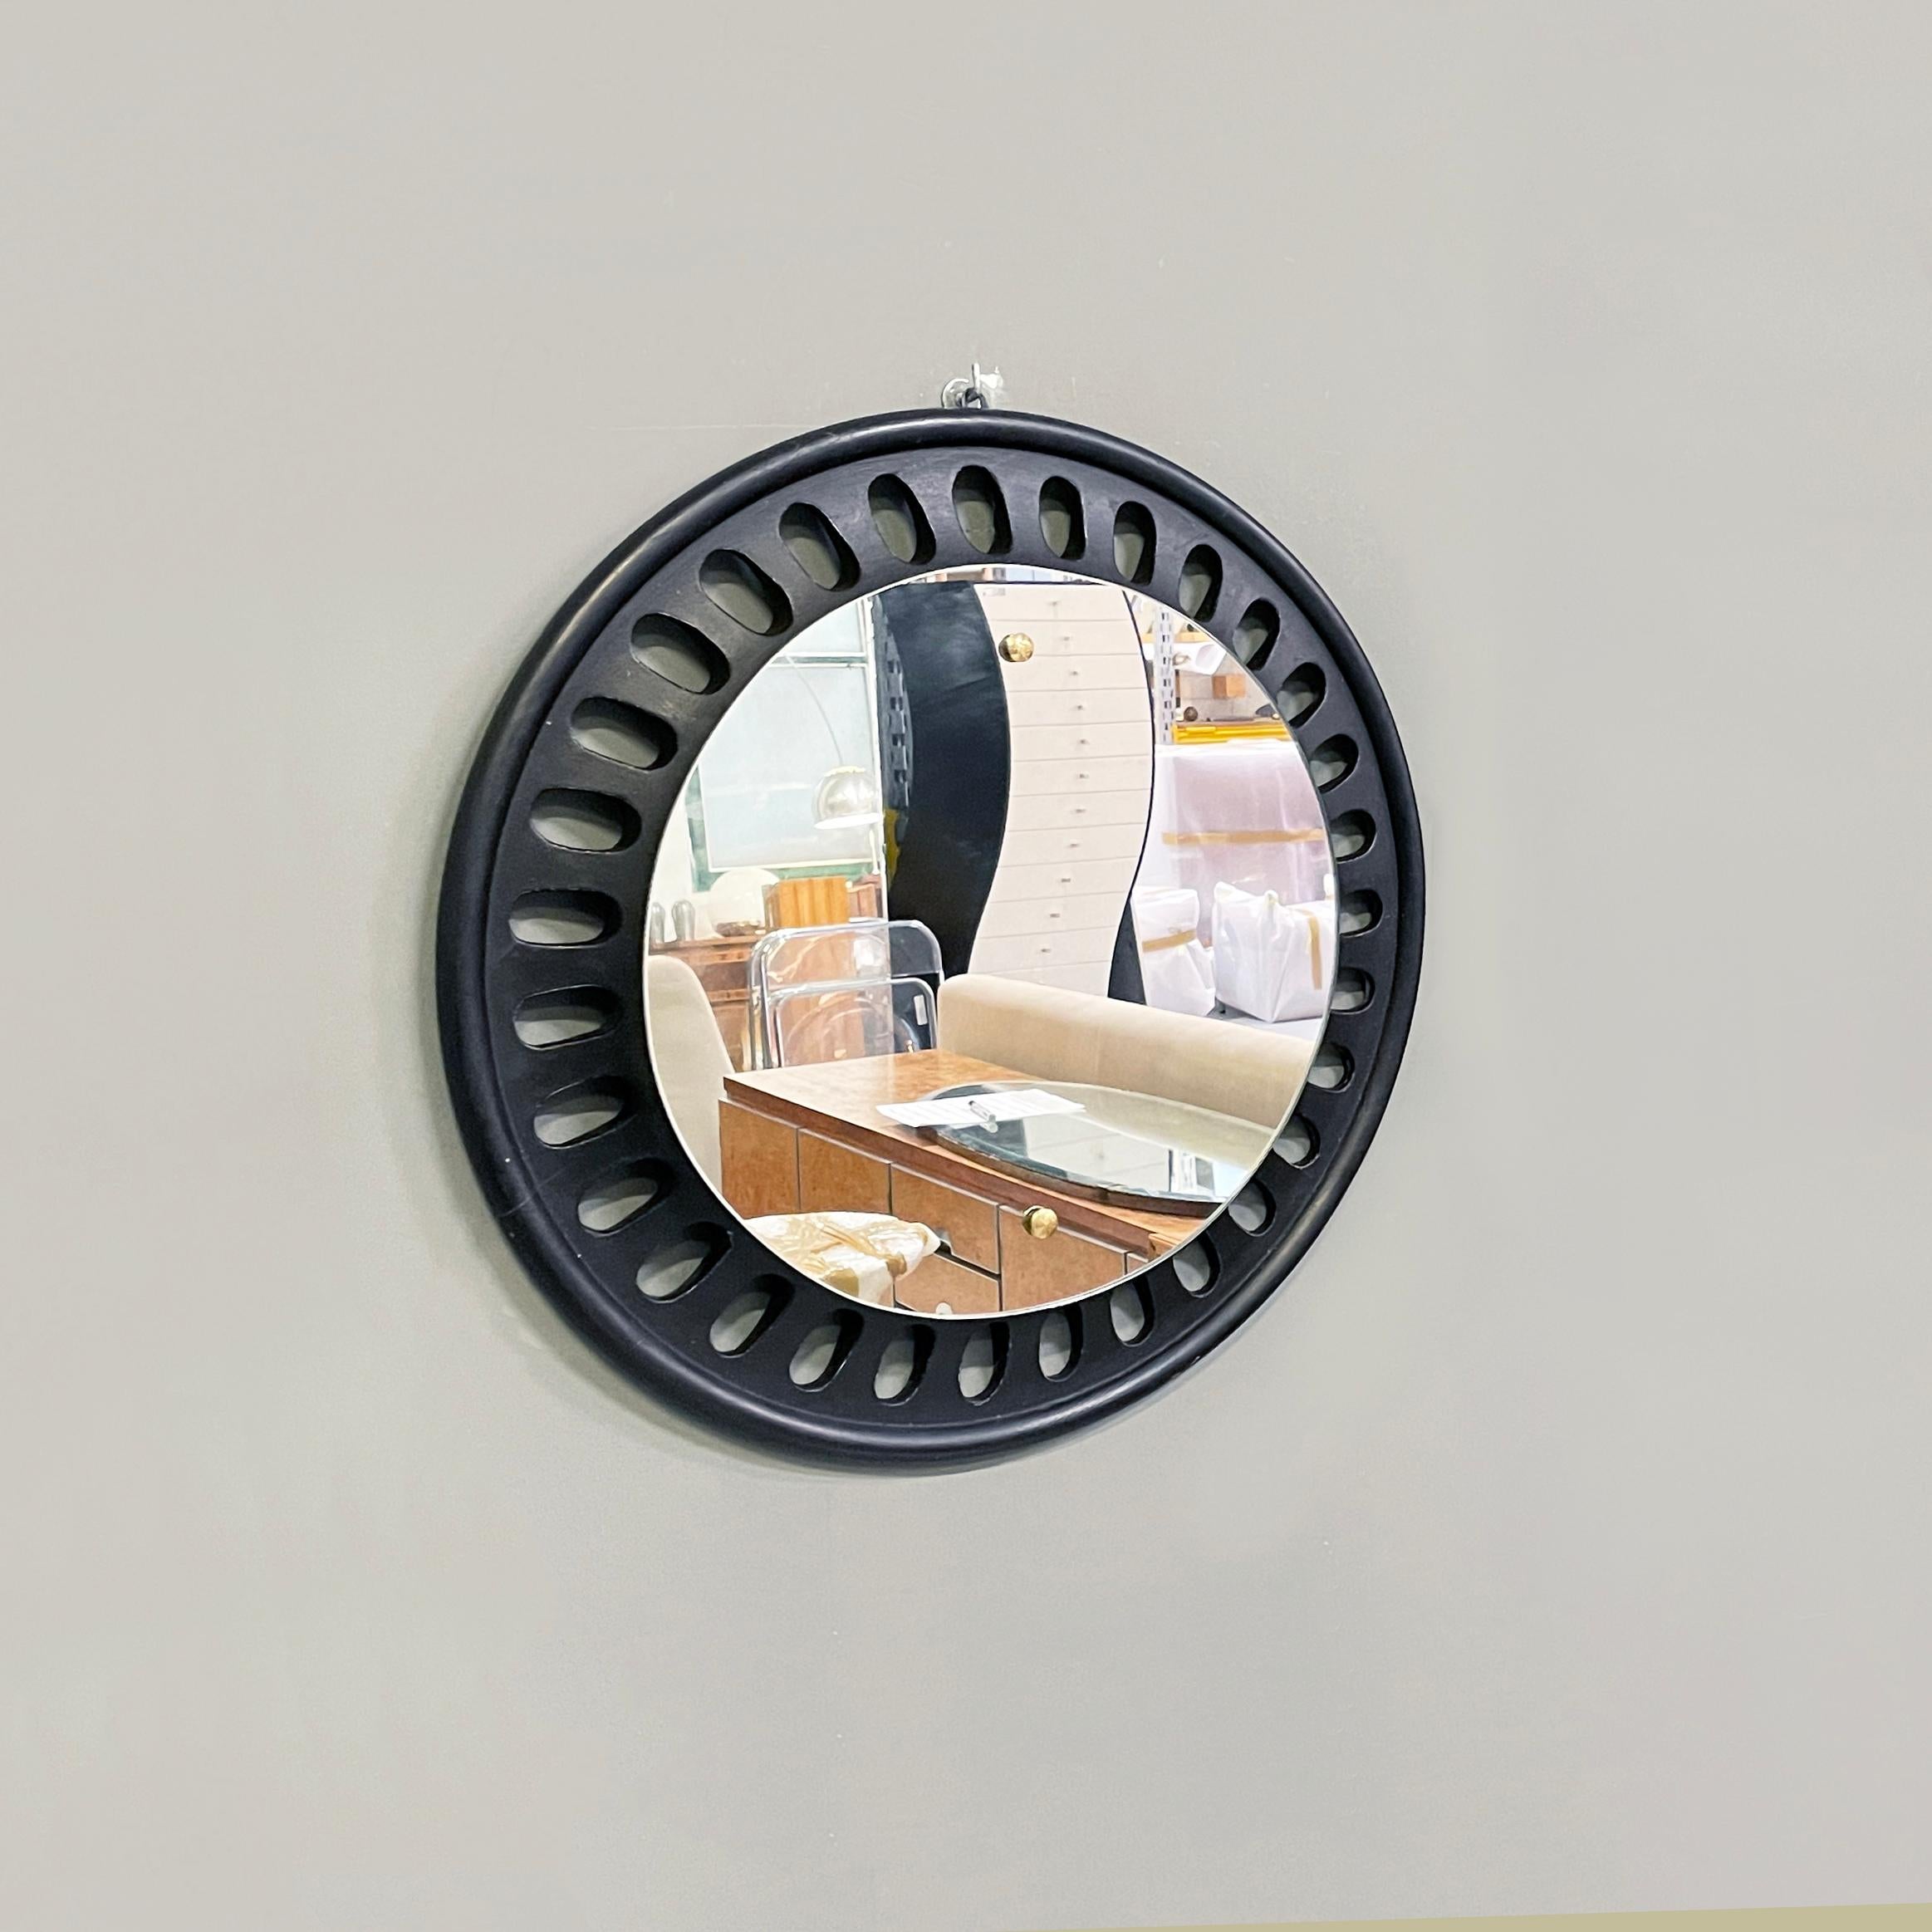 Italian Round wall mirror in black wood, 20th century
Round wall mirror in black painted wood. The frame has oval decorations. Small brass buttons on the mirror. 
20th century.
Good condition, light marks on the wood. The brass is in